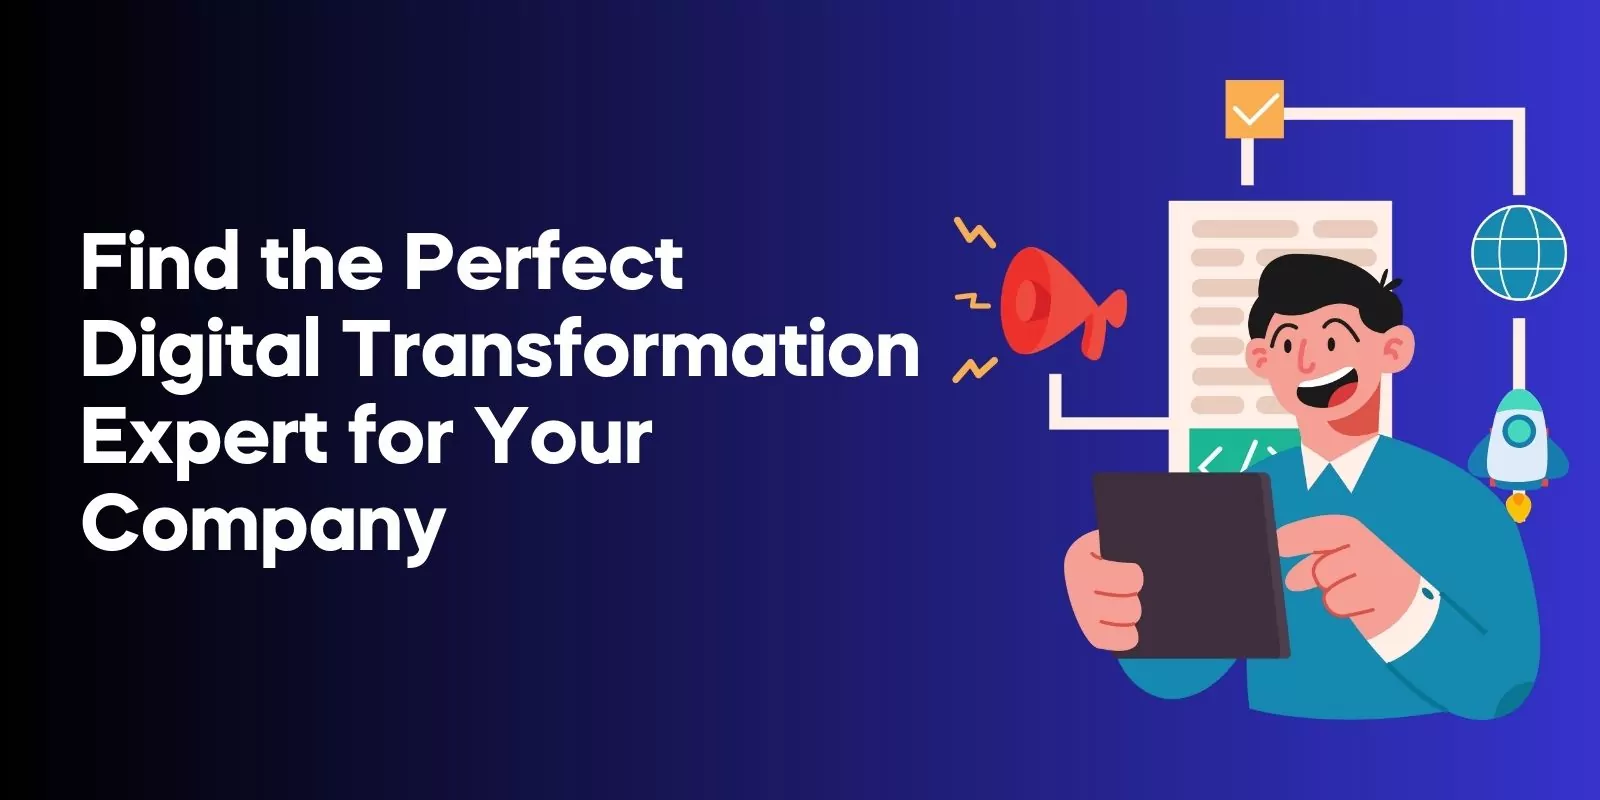 Find the Perfect Digital Transformation Expert for Your Company